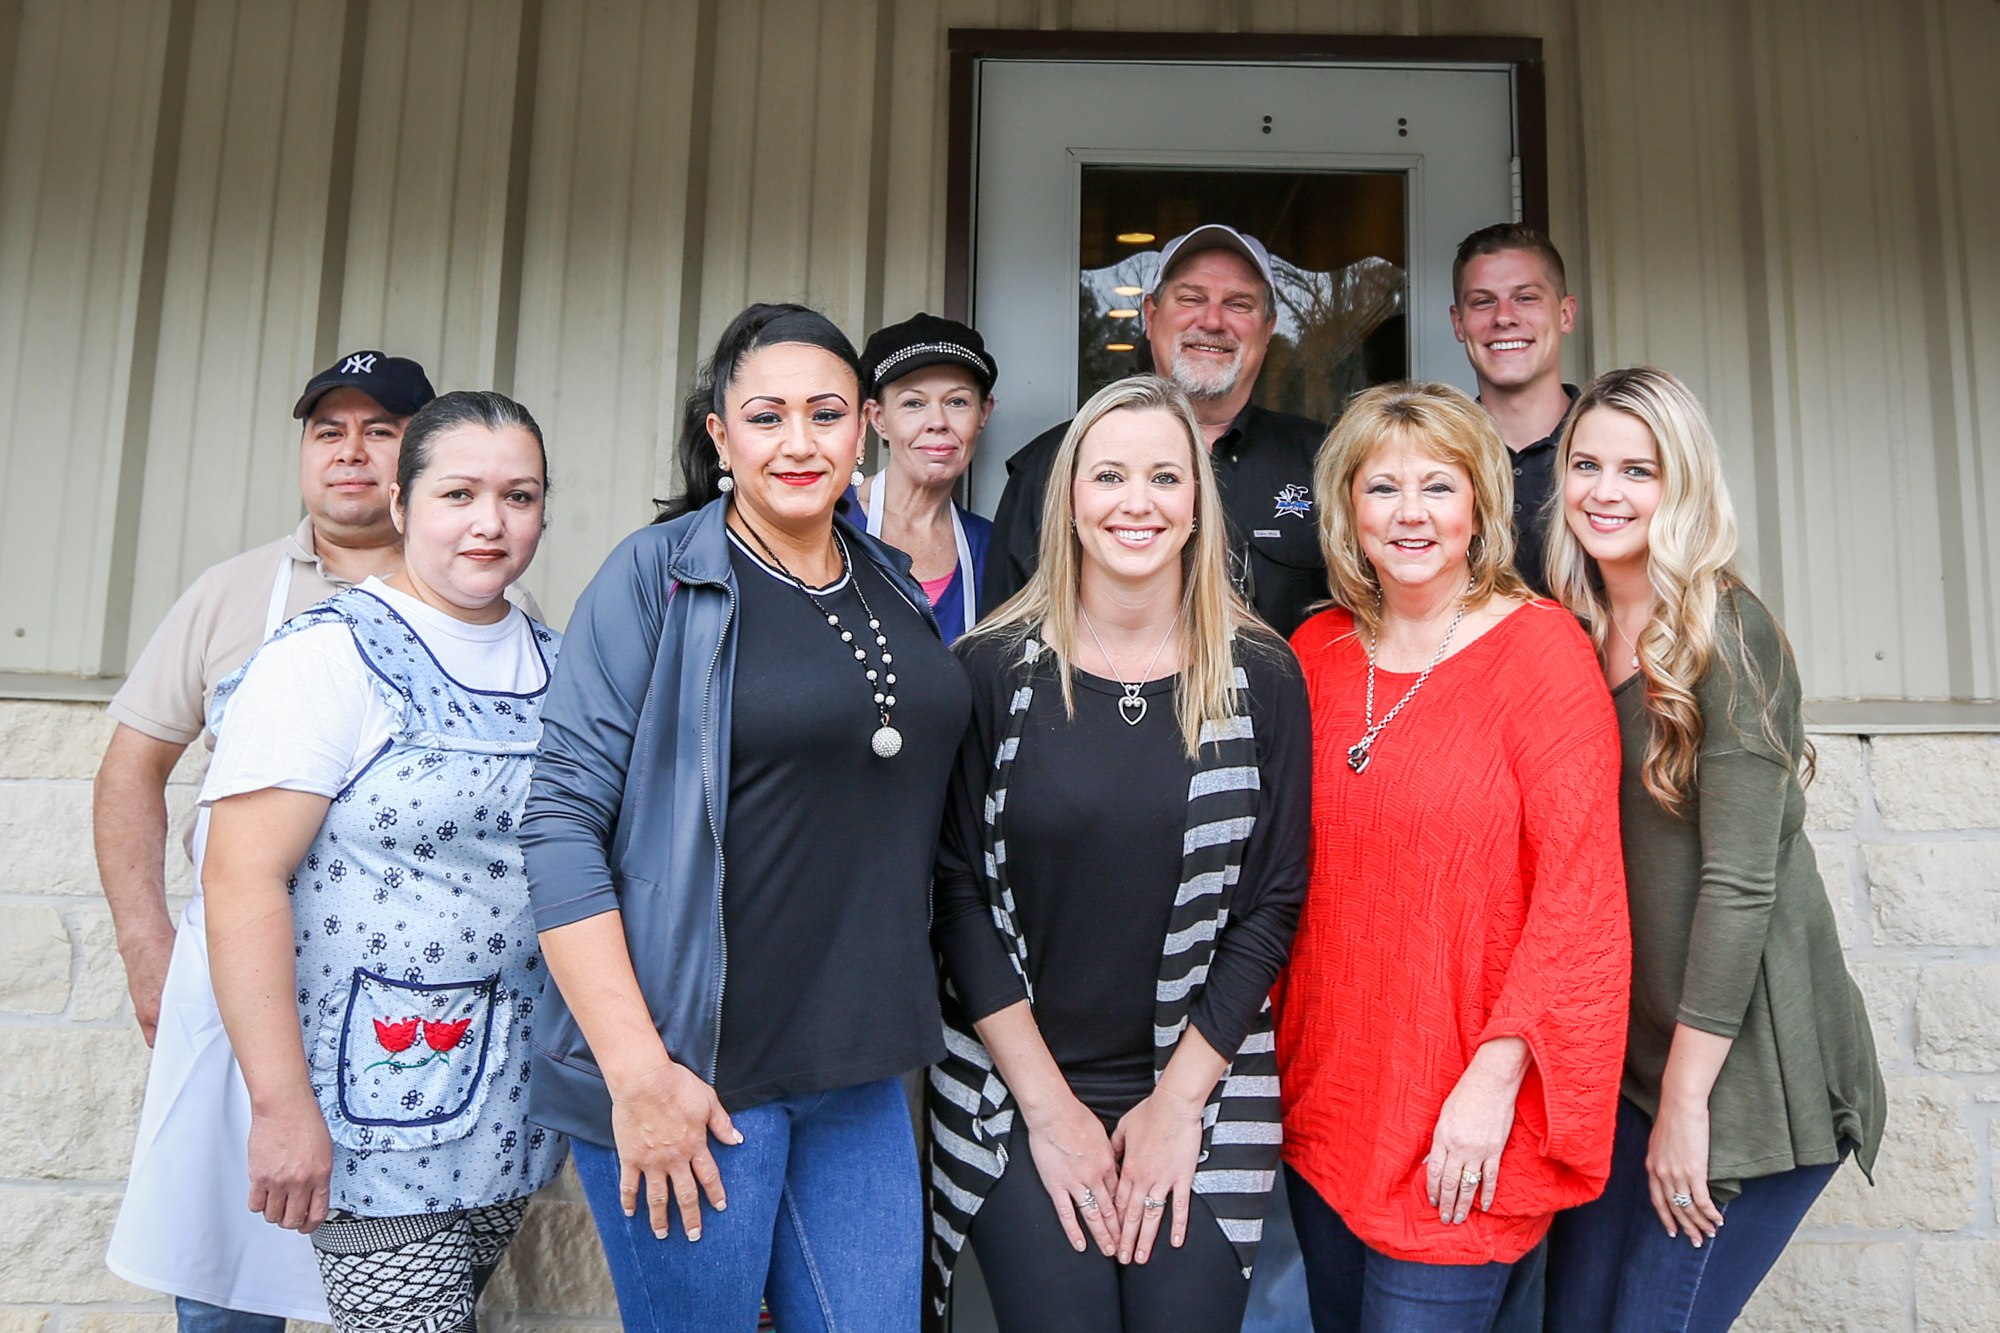 Conroe Chamber honors All Star Catering Company as inaugural 2016 Small Business of the Year - mySanAntonio.com